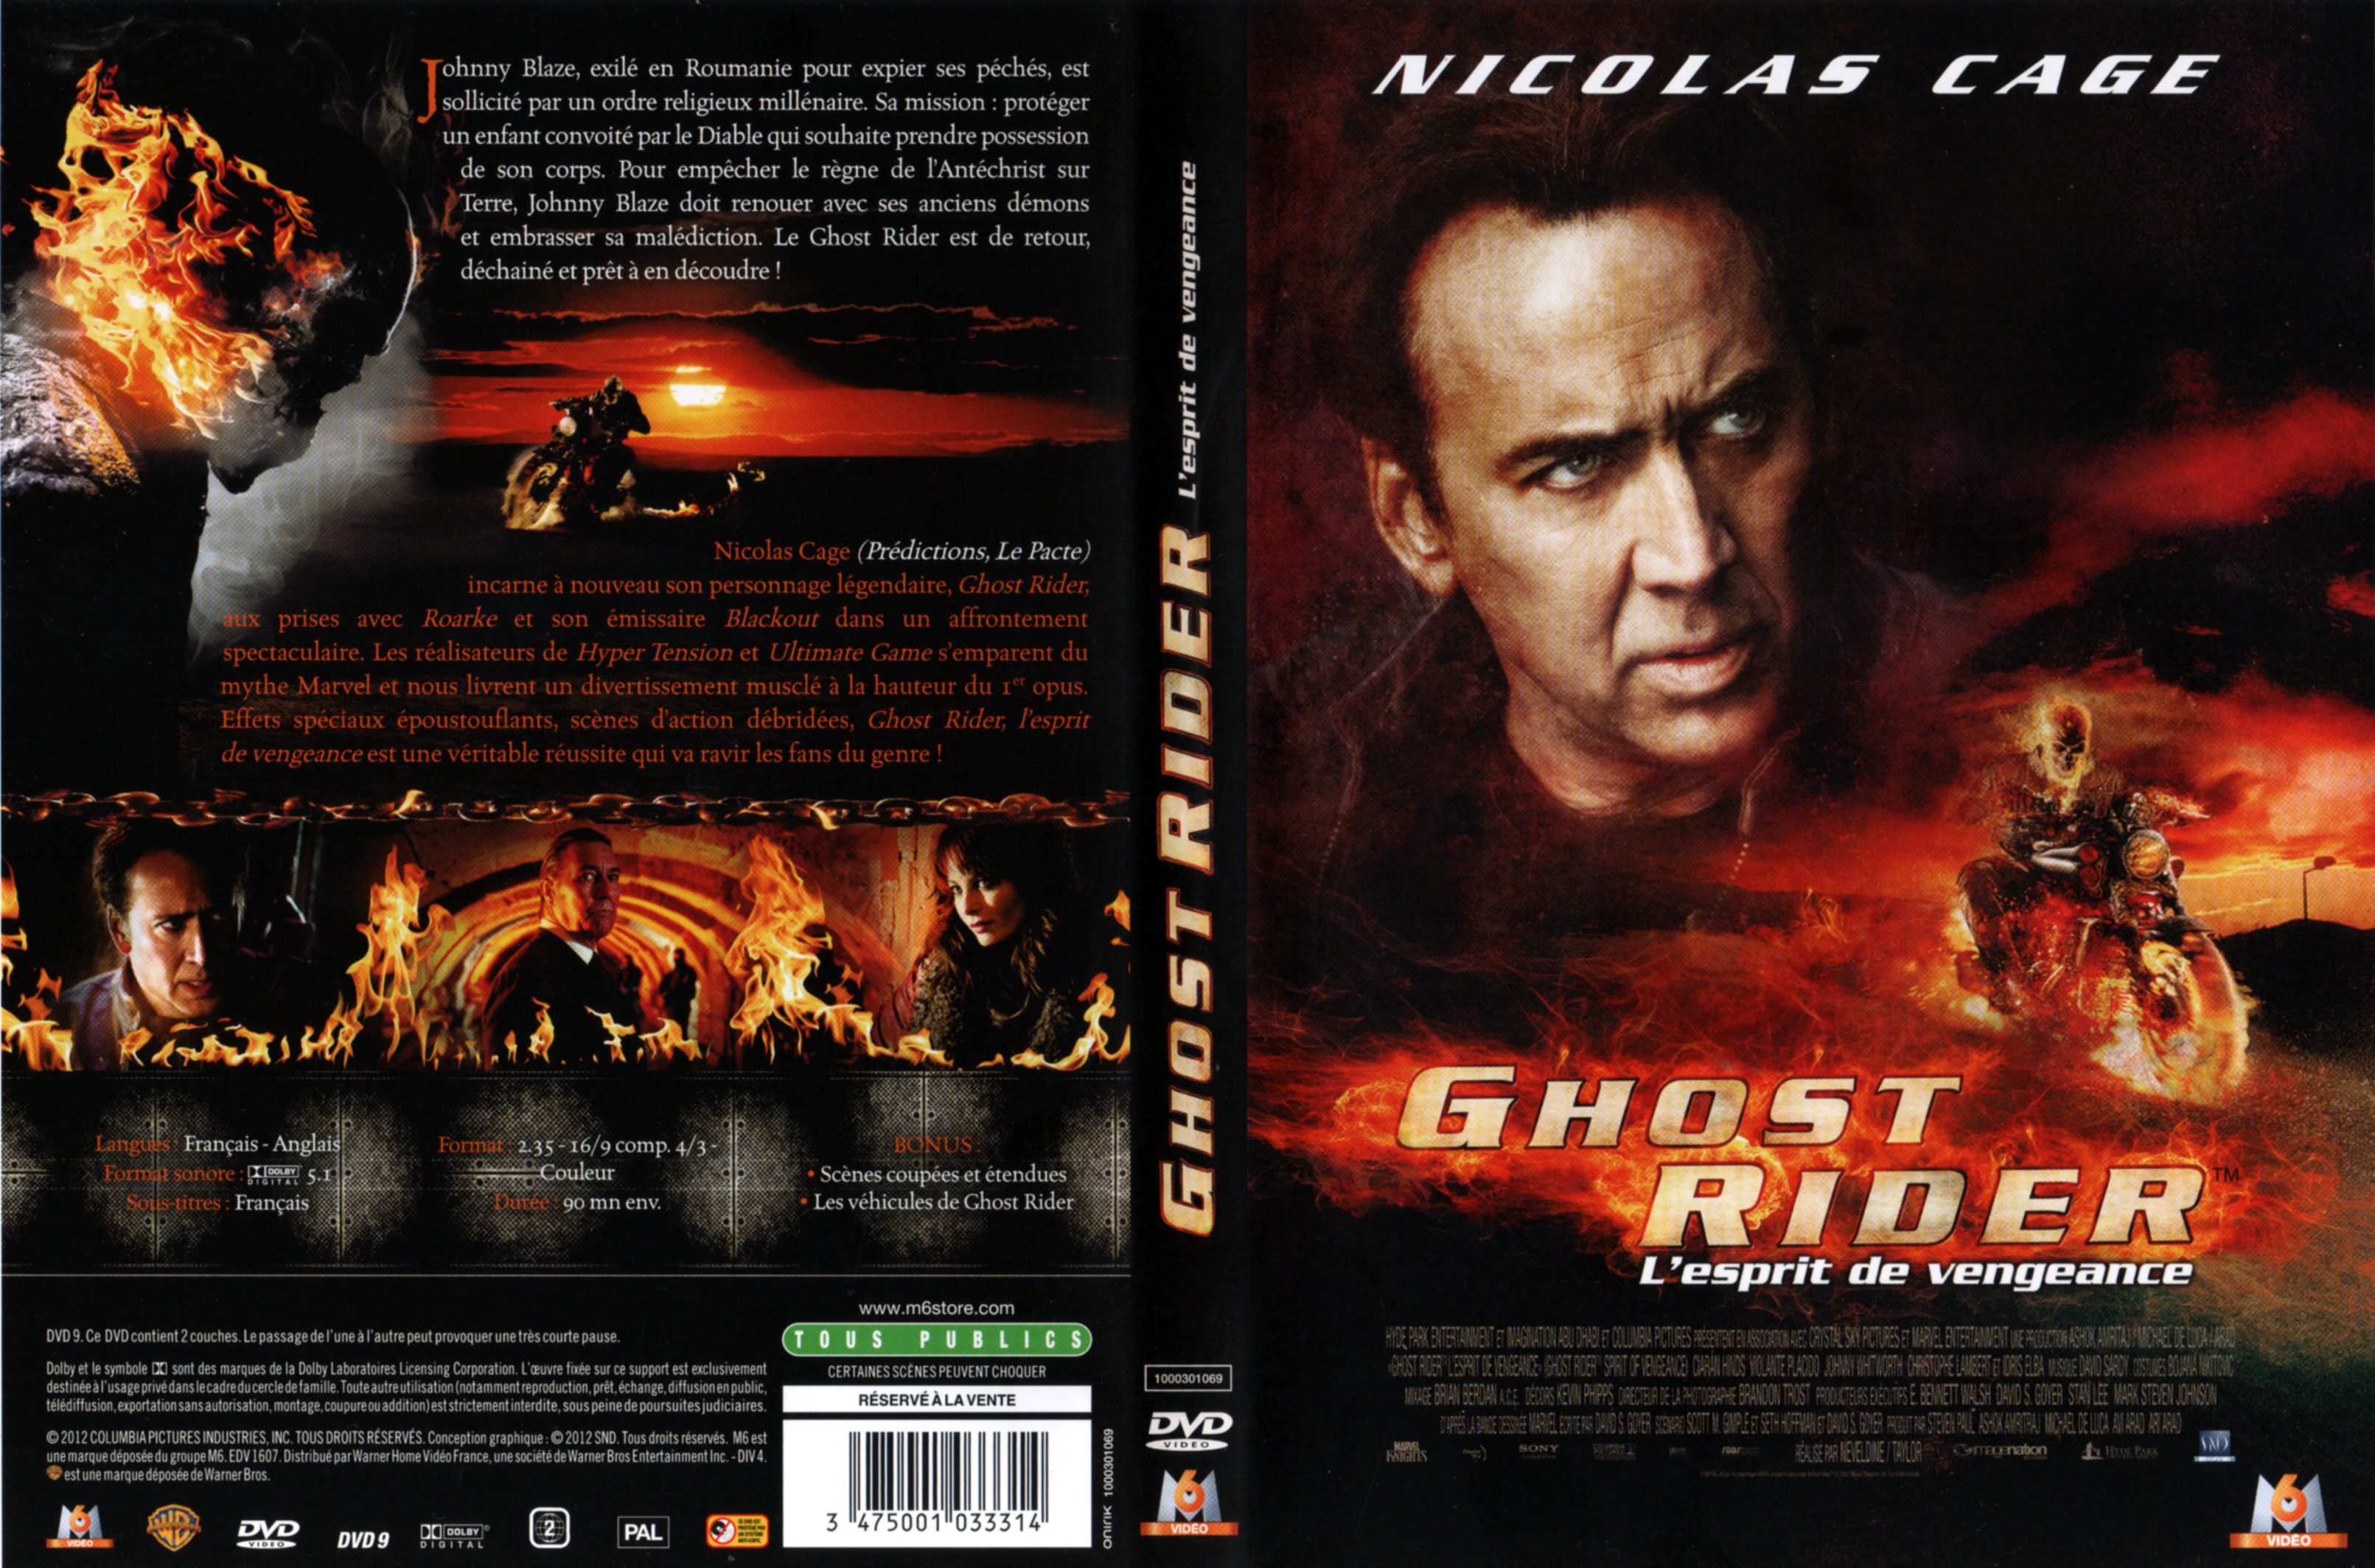 Jaquette DVD Ghost Rider 2 l